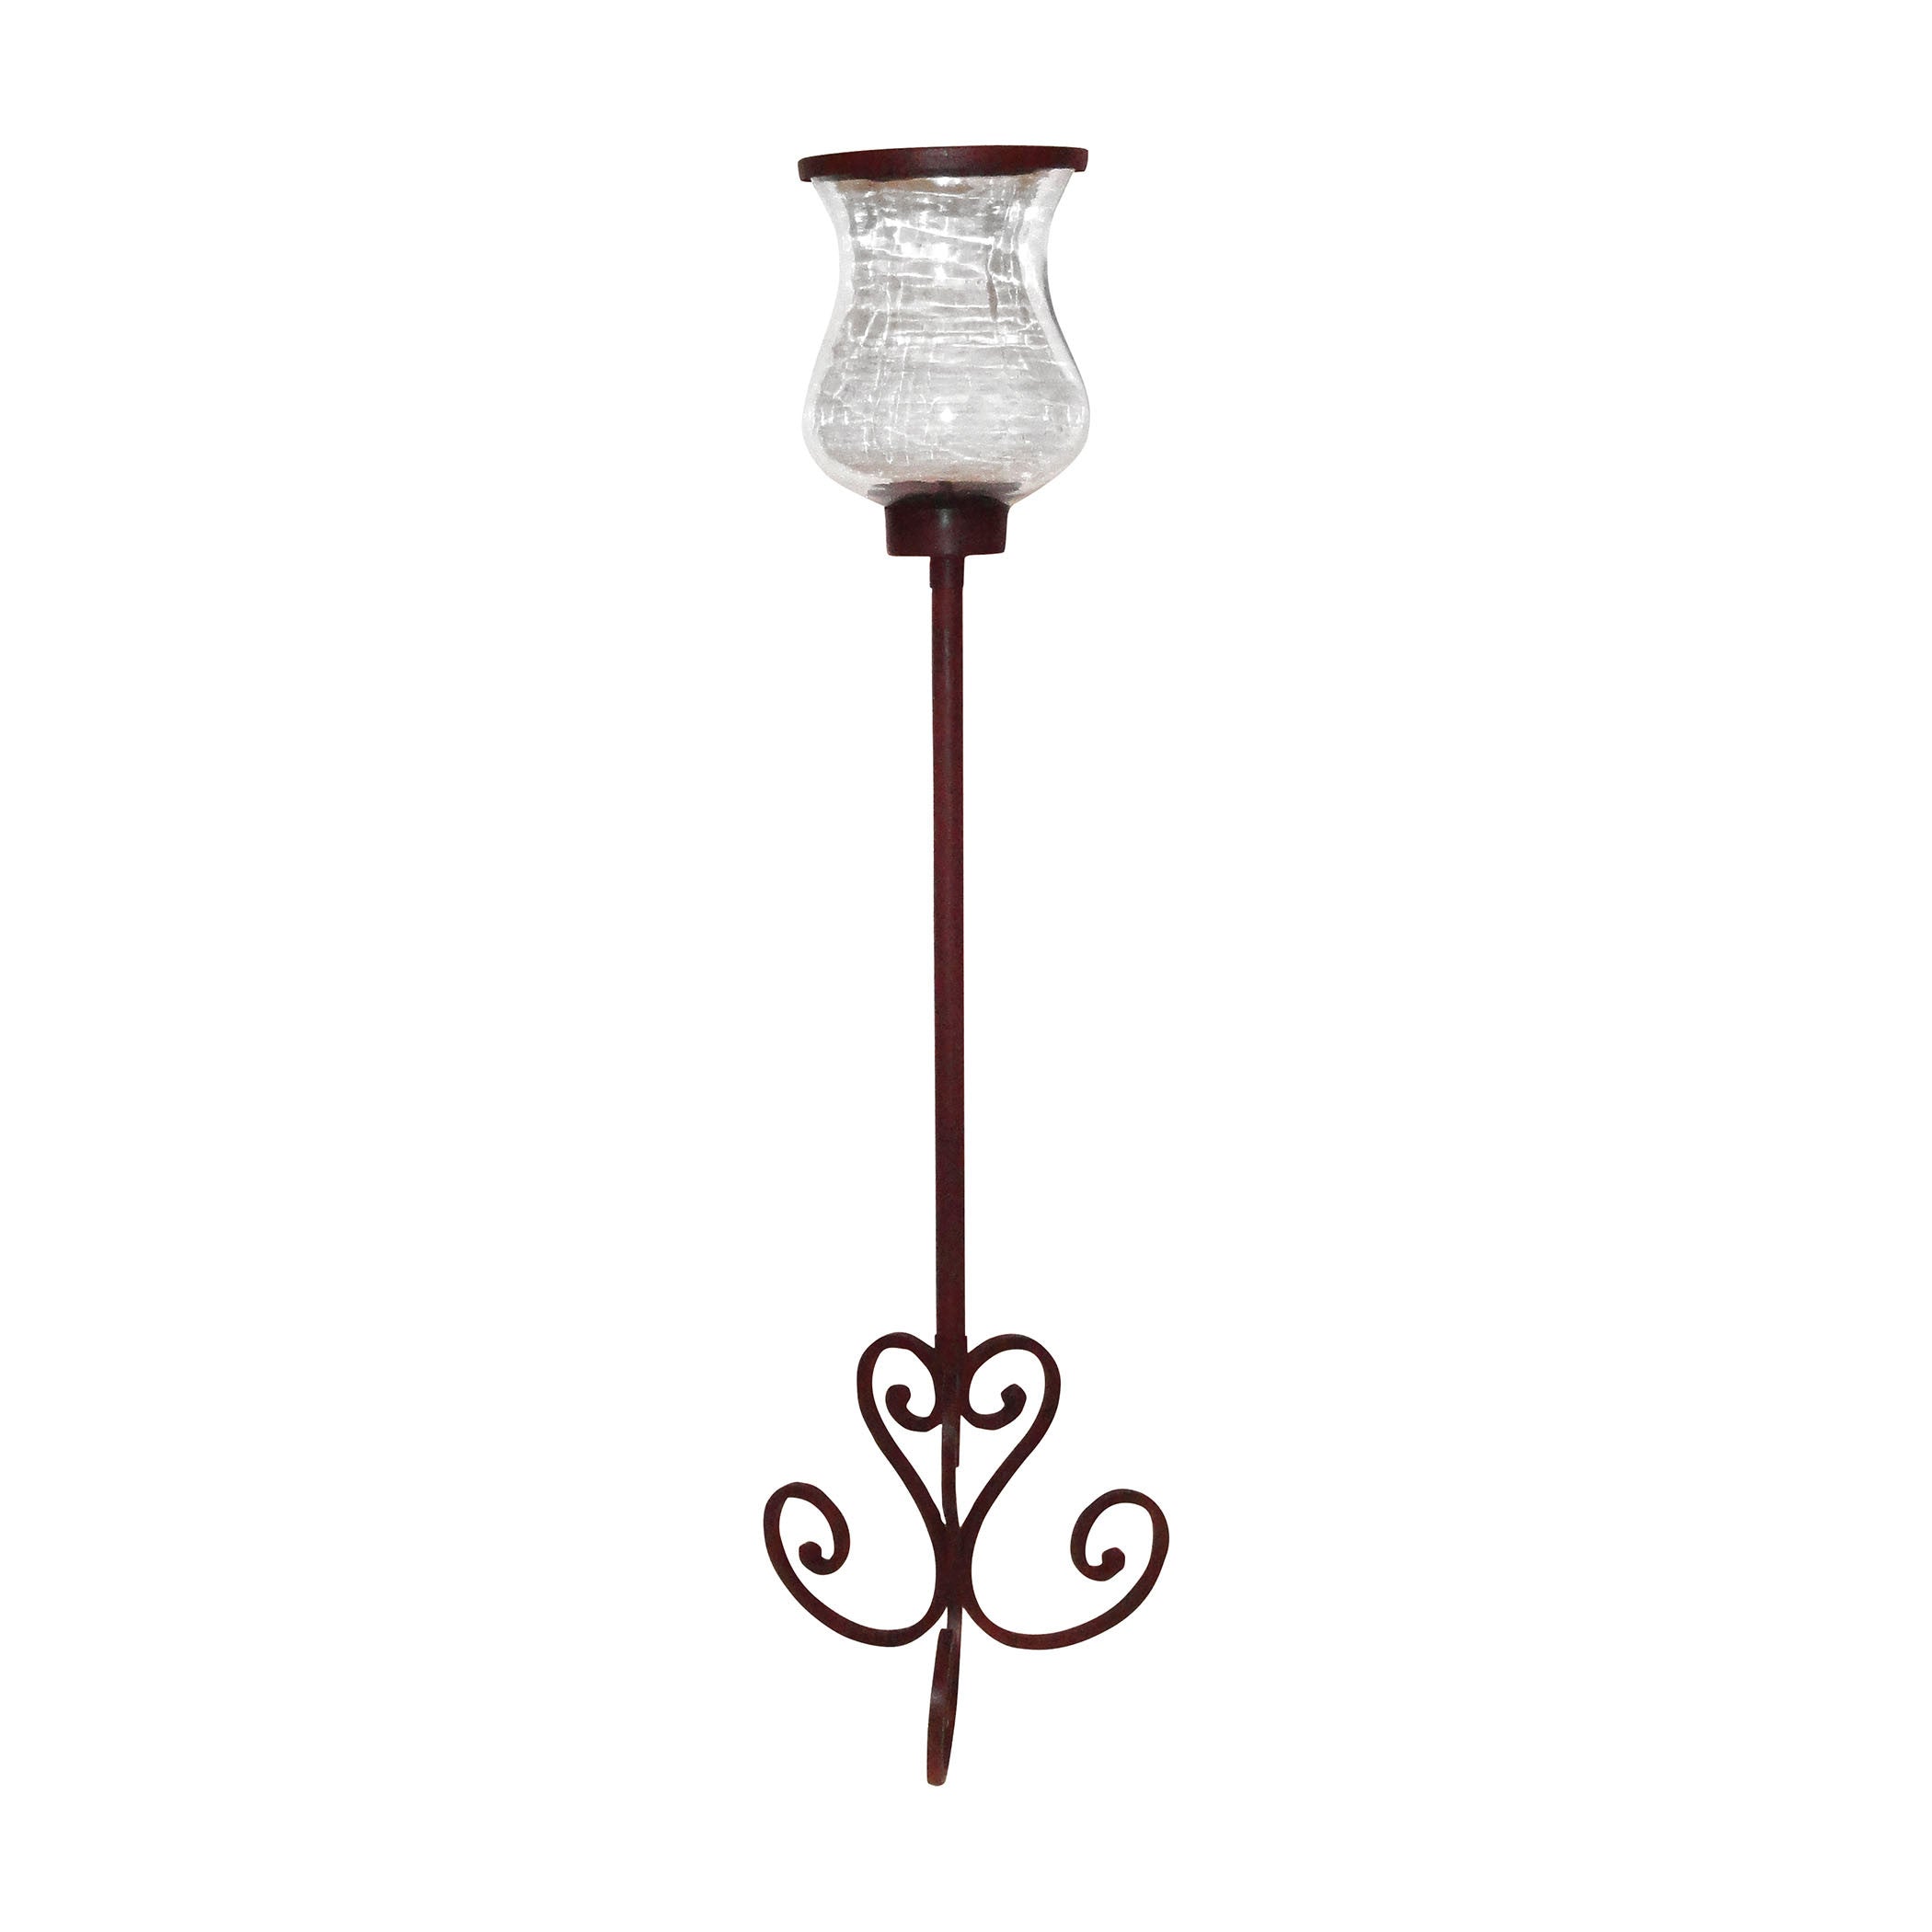 Pomeroy Pom-618161 Deseo Collection Montana Rustic,clear Finish Candle/candle Holder